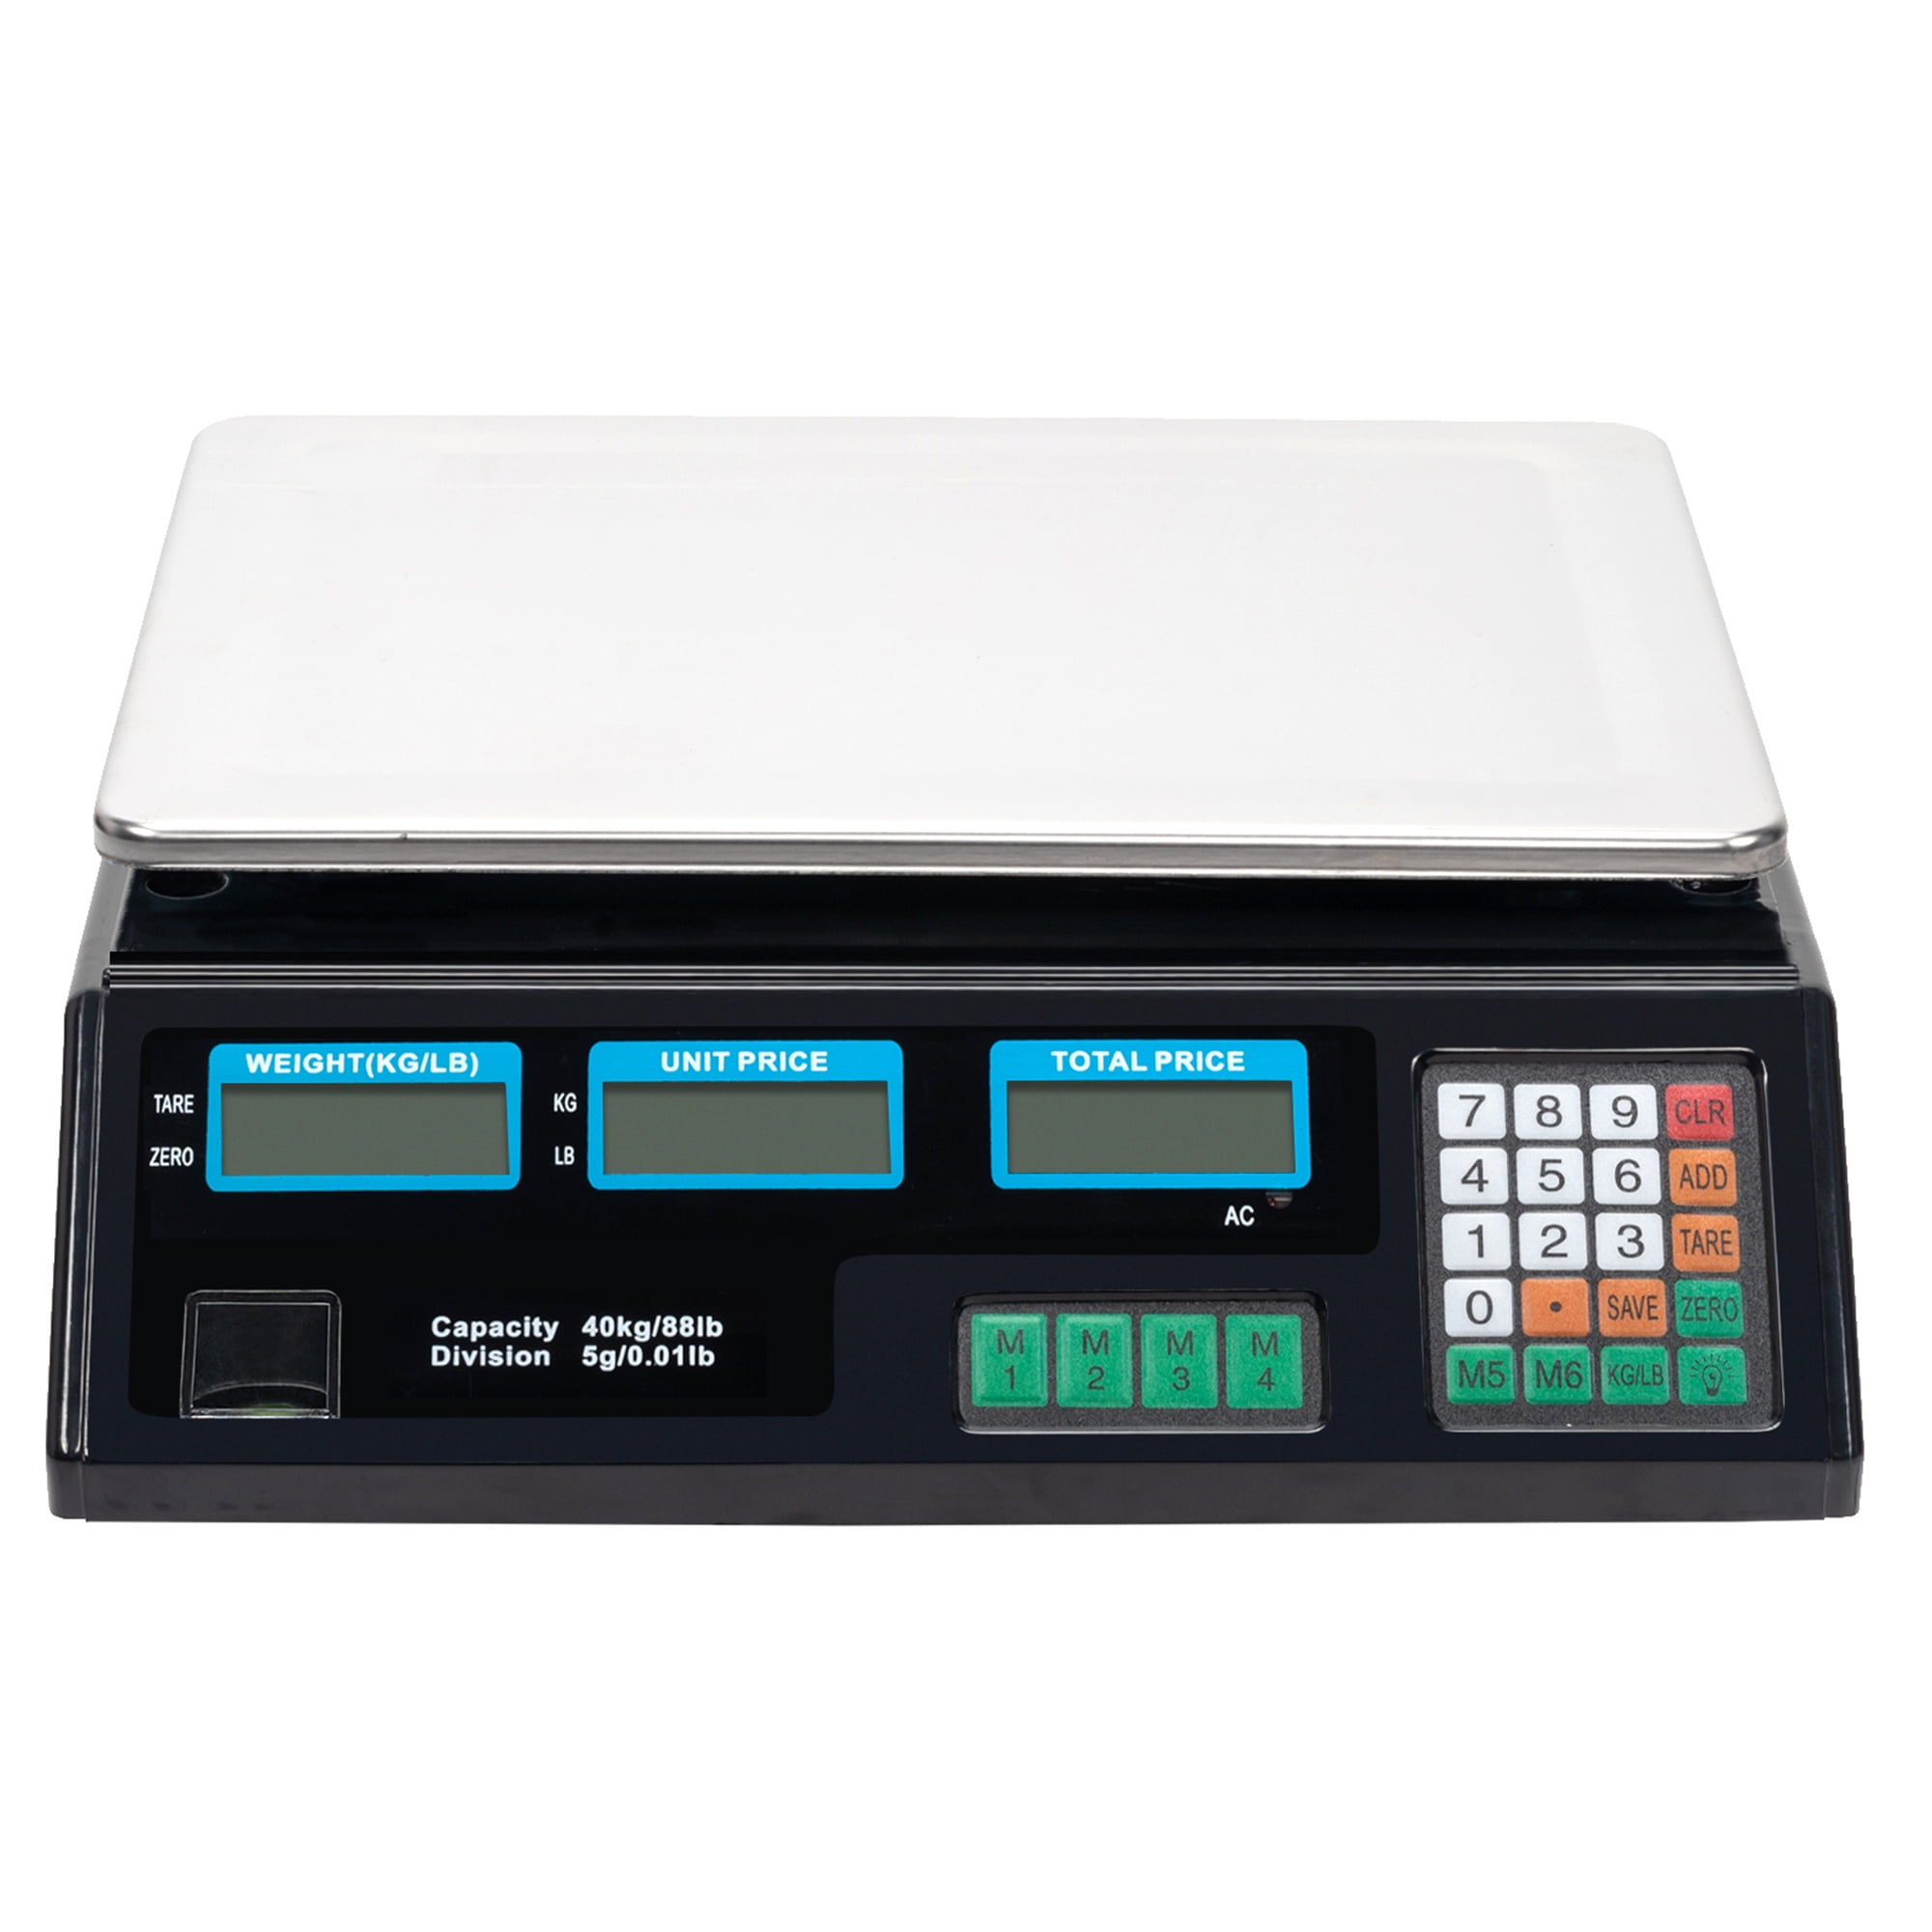 Digital scale • Compare (700+ products) see prices »